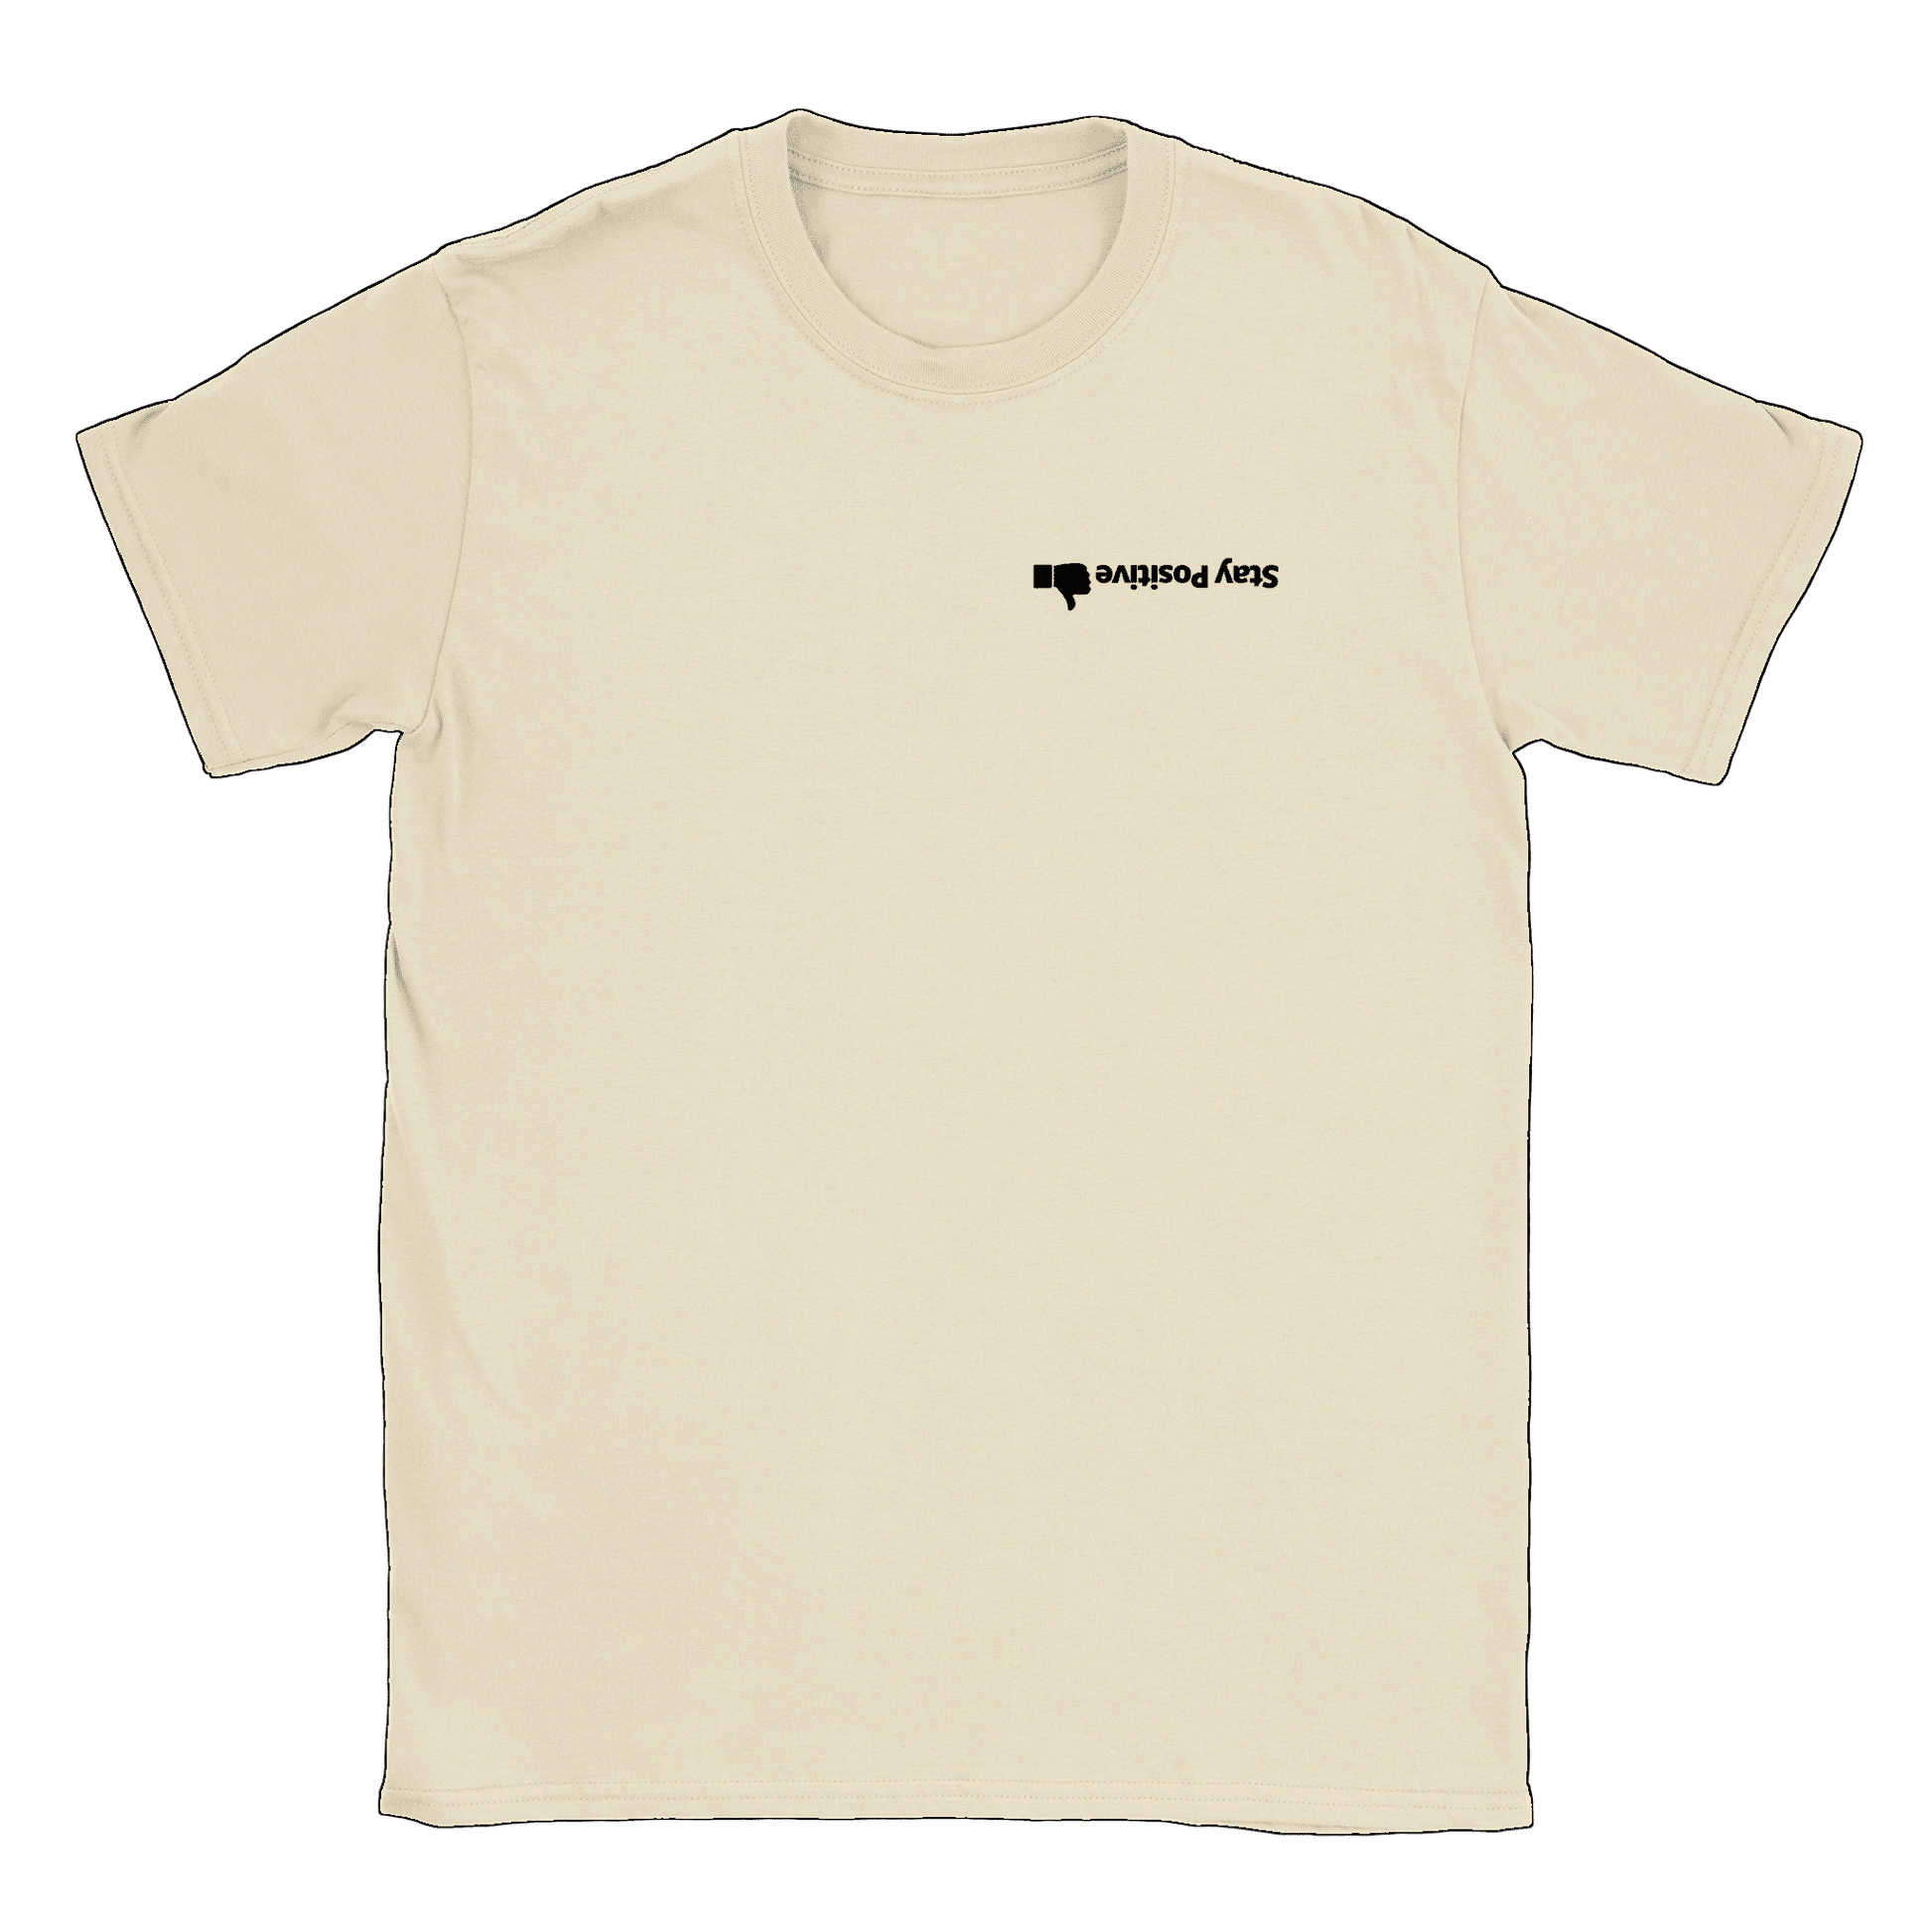 Stay Positive - T-shirt Natural